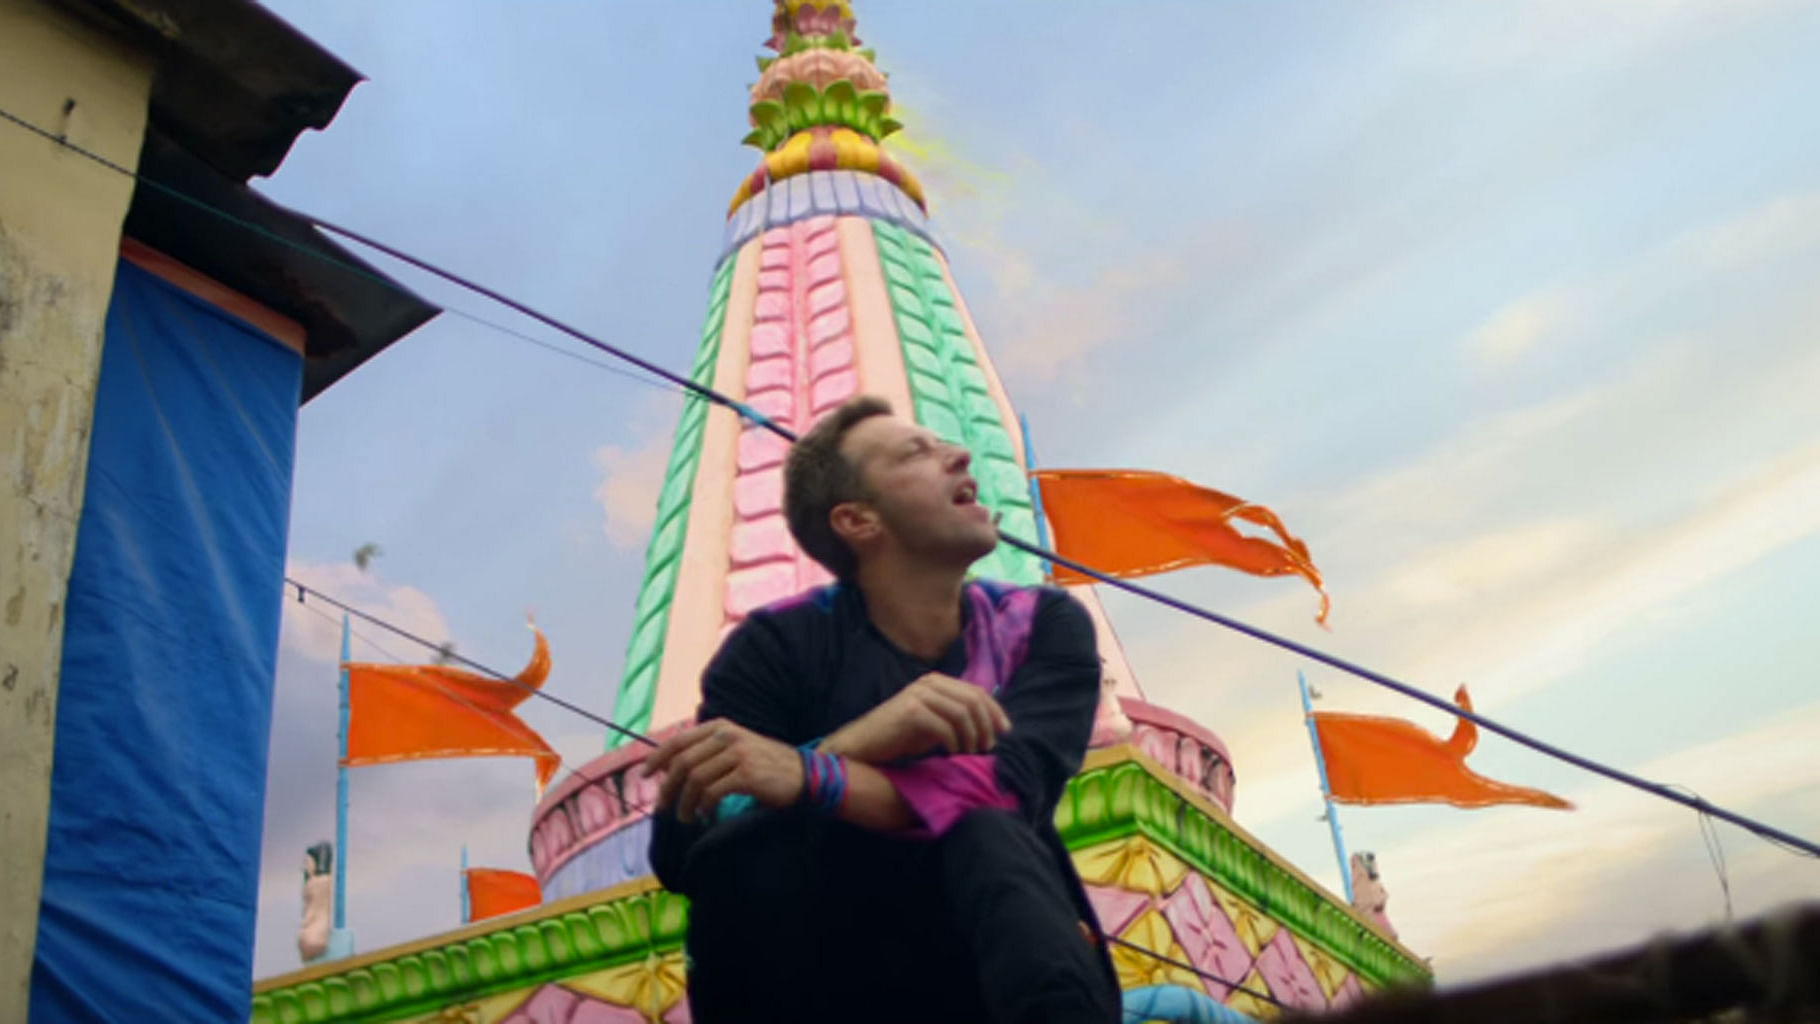 Is the Coldplay music video really cultural appropriation? (Photo courtesy: YouTube)